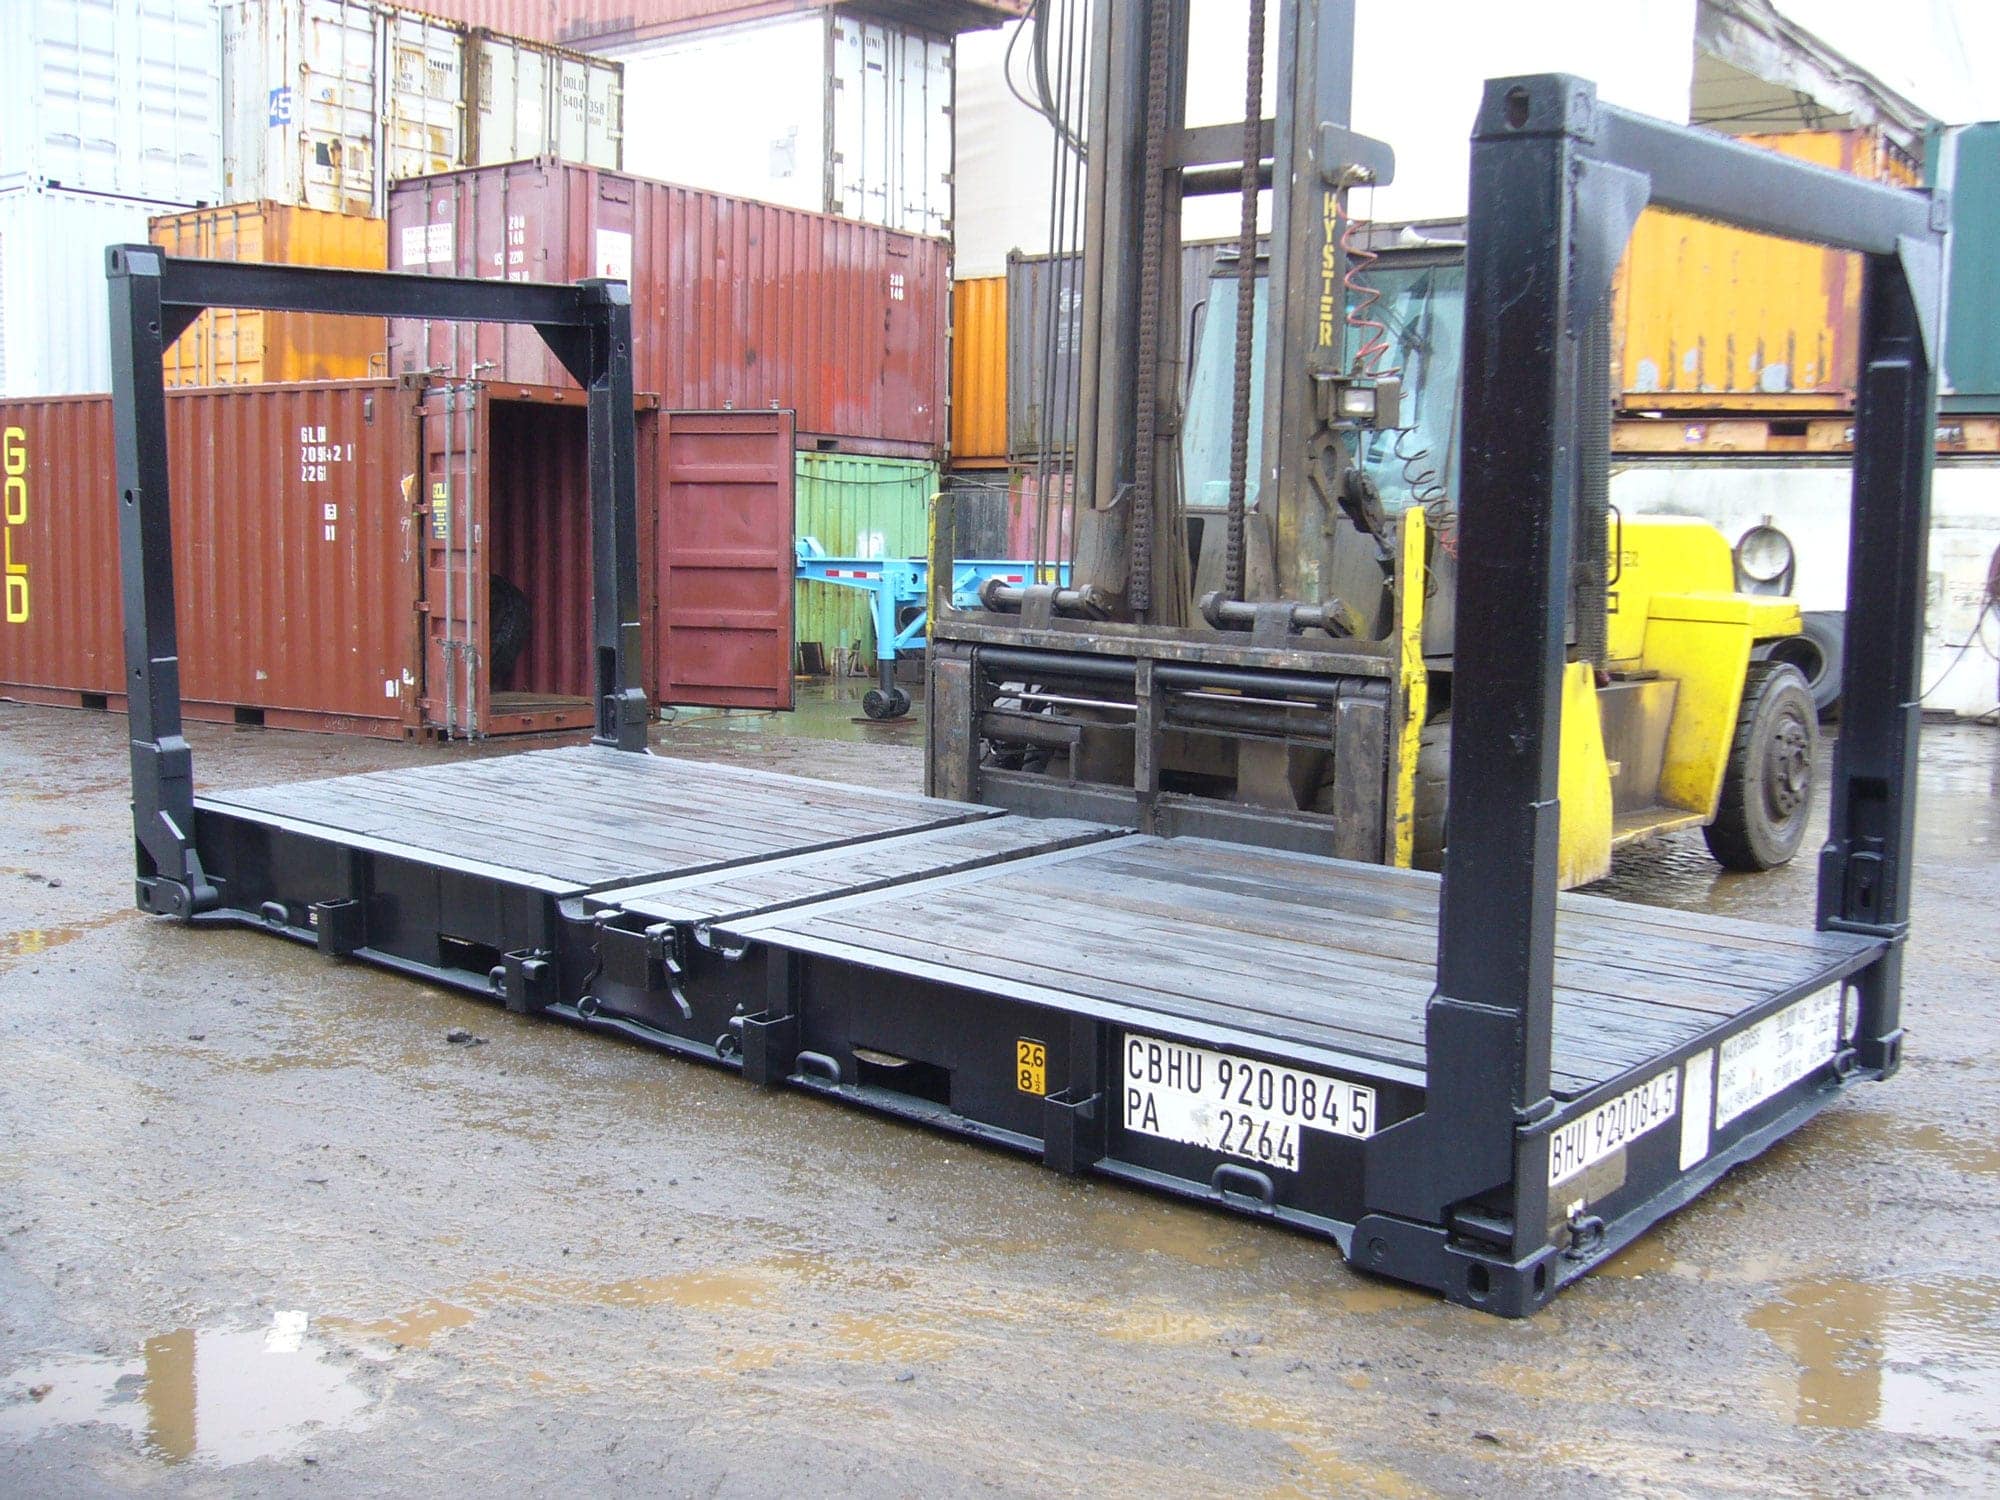 TRS stocks 20ft fixed end or collapsible flatracks and platforms